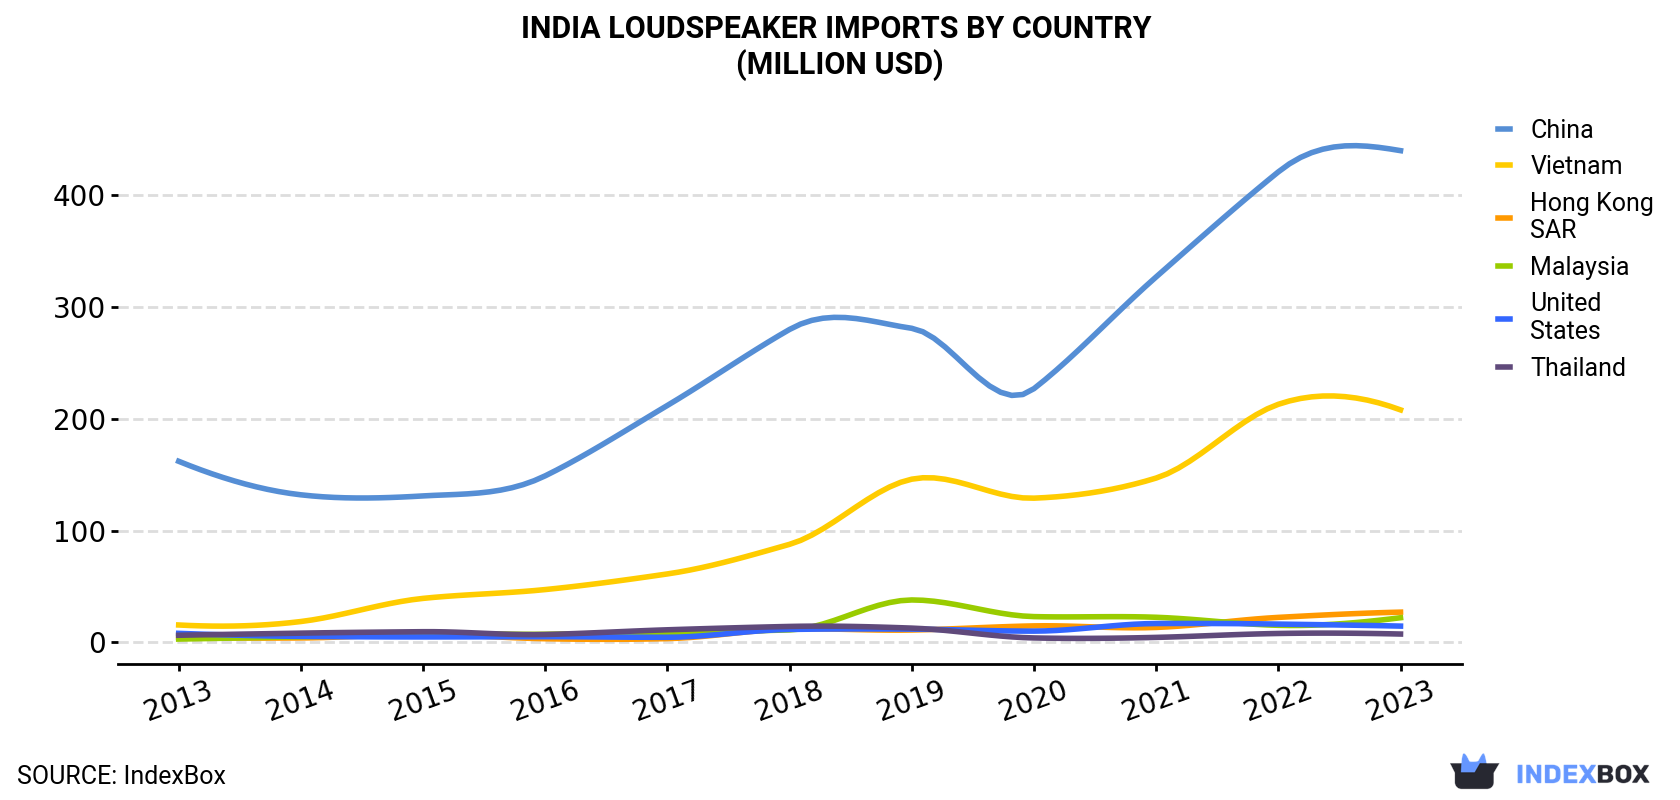 India Loudspeaker Imports By Country (Million USD)